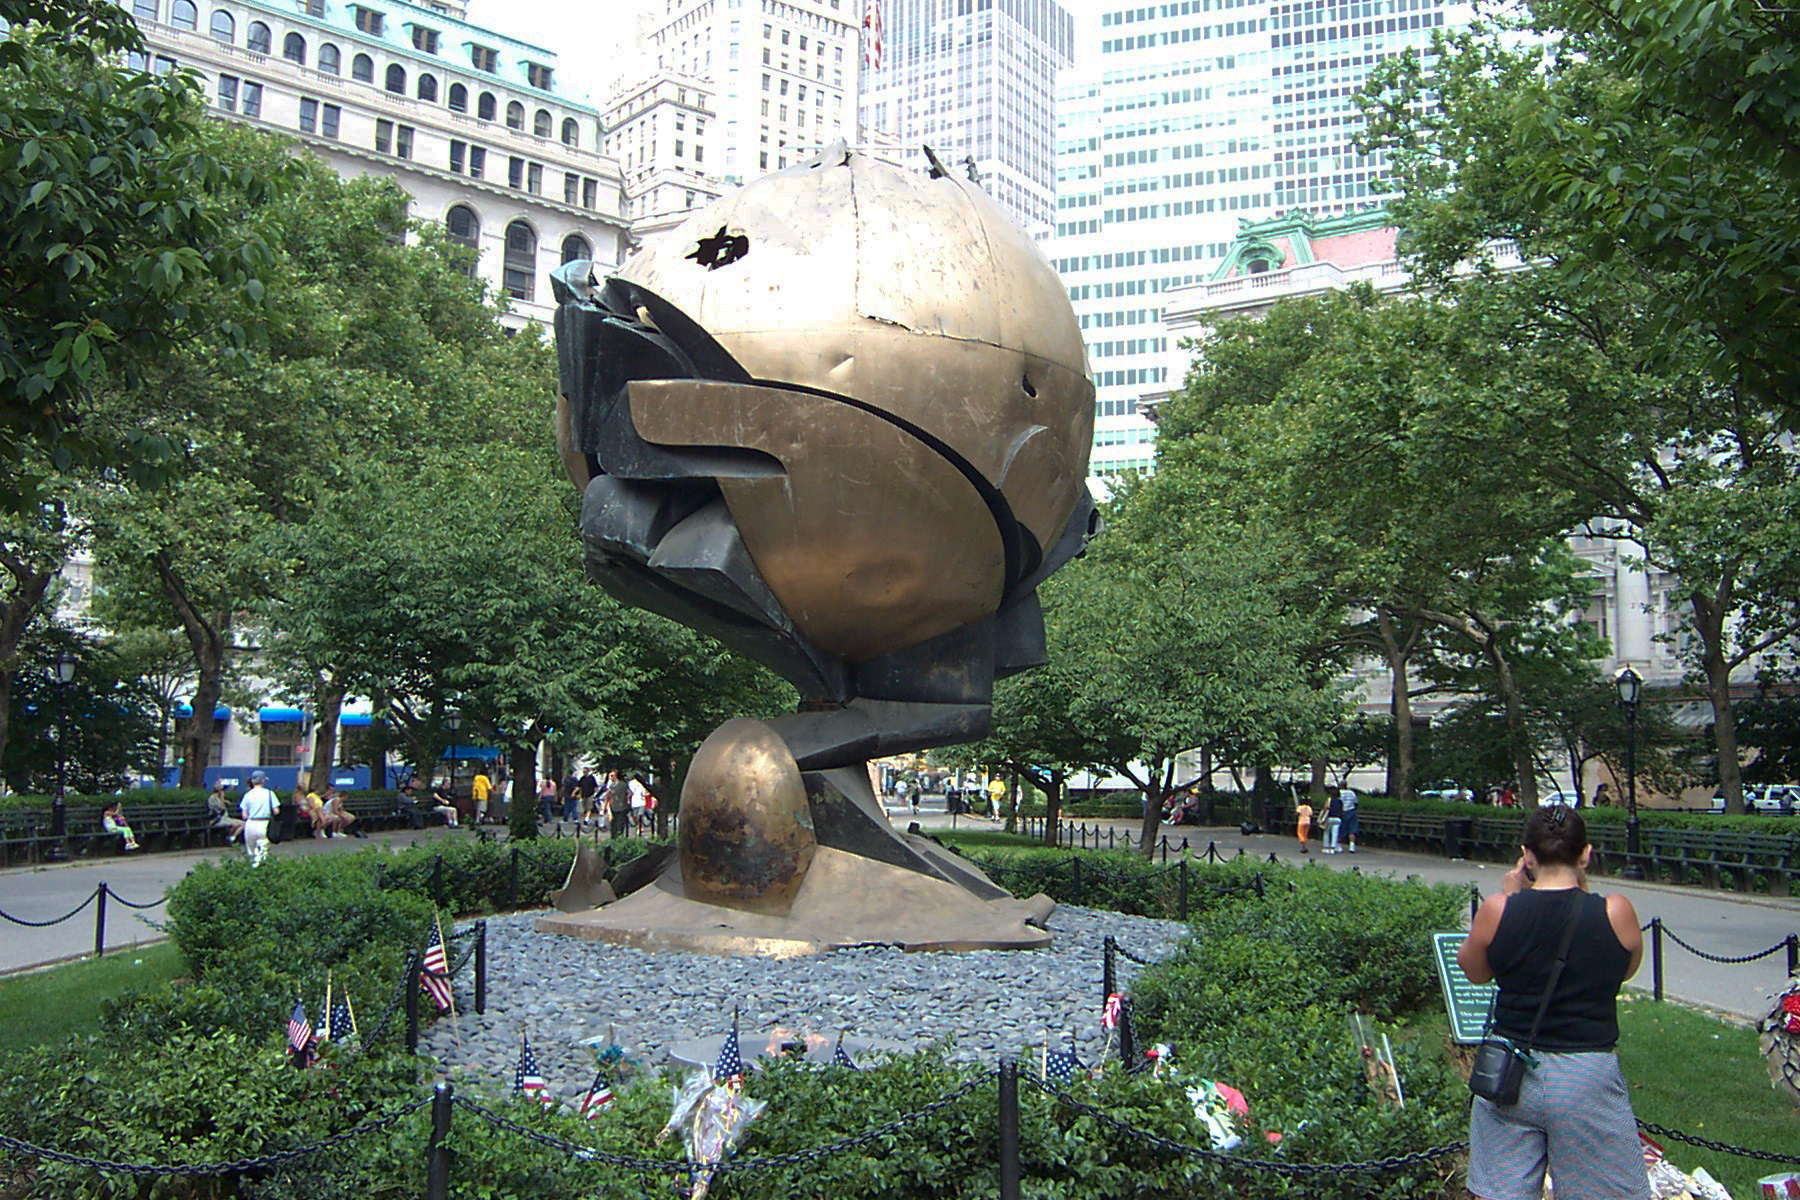 The Fritz Koenig sculpture that formed the centerpiece of the old World Trade Center plaza until it was damaged in the 9/11 attacks. Since then it has stood in The Battery, as locals lobby to return it to its original site.